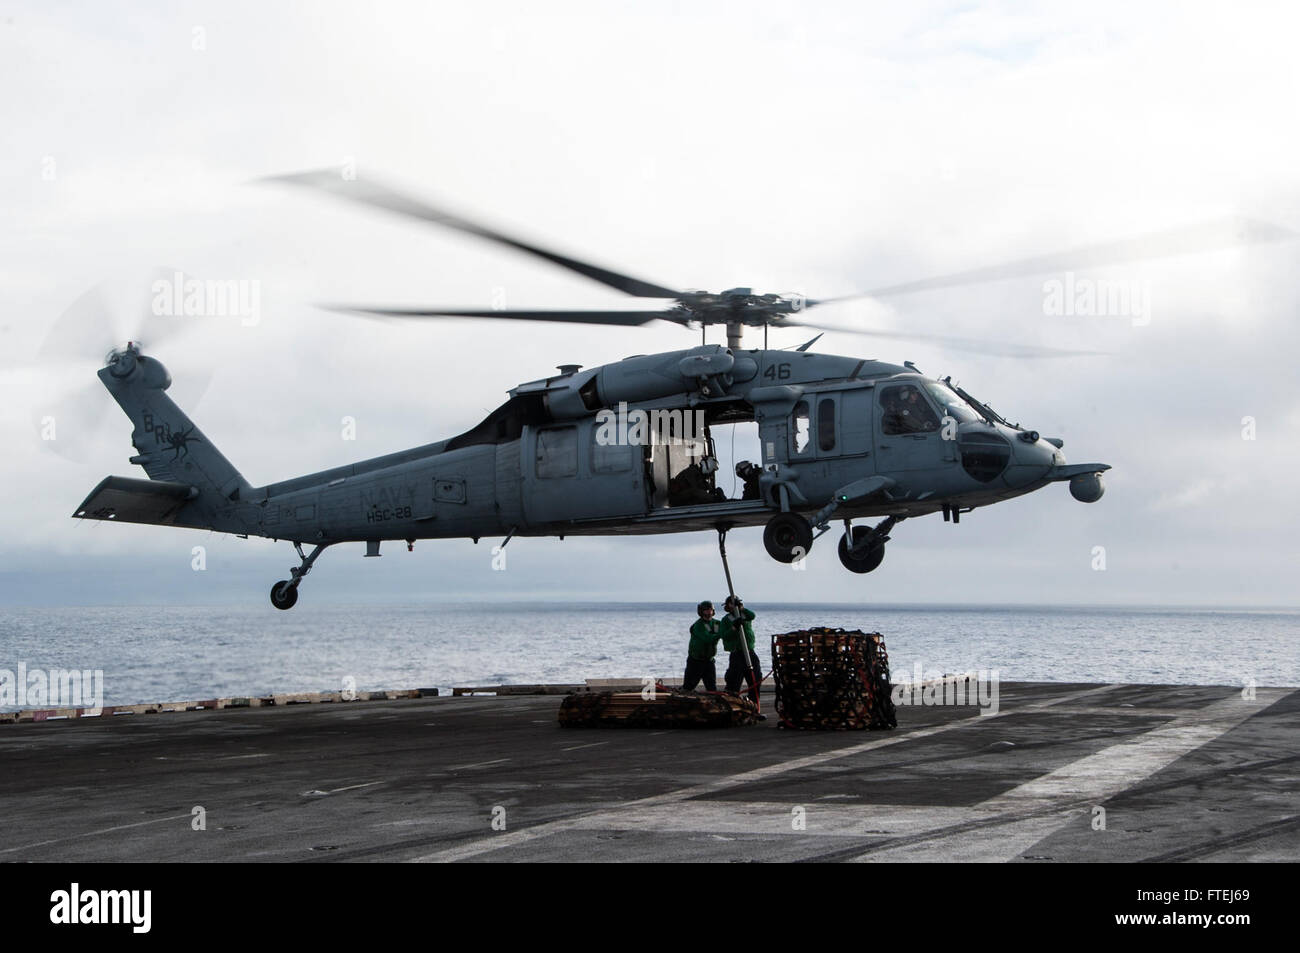 ATLANTIC OCEAN (Nov. 7, 2014) An MH-60S Sea Hawk, attached to the &quot;Dragon Whales&quot; of Helicopter Sea Combat Squadron (HSC) 28, conducts a vertical replenishment (VERTREP) with the aircraft carrier USS George H.W. Bush (CVN 77). George H.W. Bush, homeported in Norfolk, Va., is conducting naval operations in the U.S. 6th Fleet area of operations in support of U.S. national security interests in Europe.  (U.S. Navy photo by Mass Communication Specialist 3rd Class Brian Stephens/Released) Stock Photo